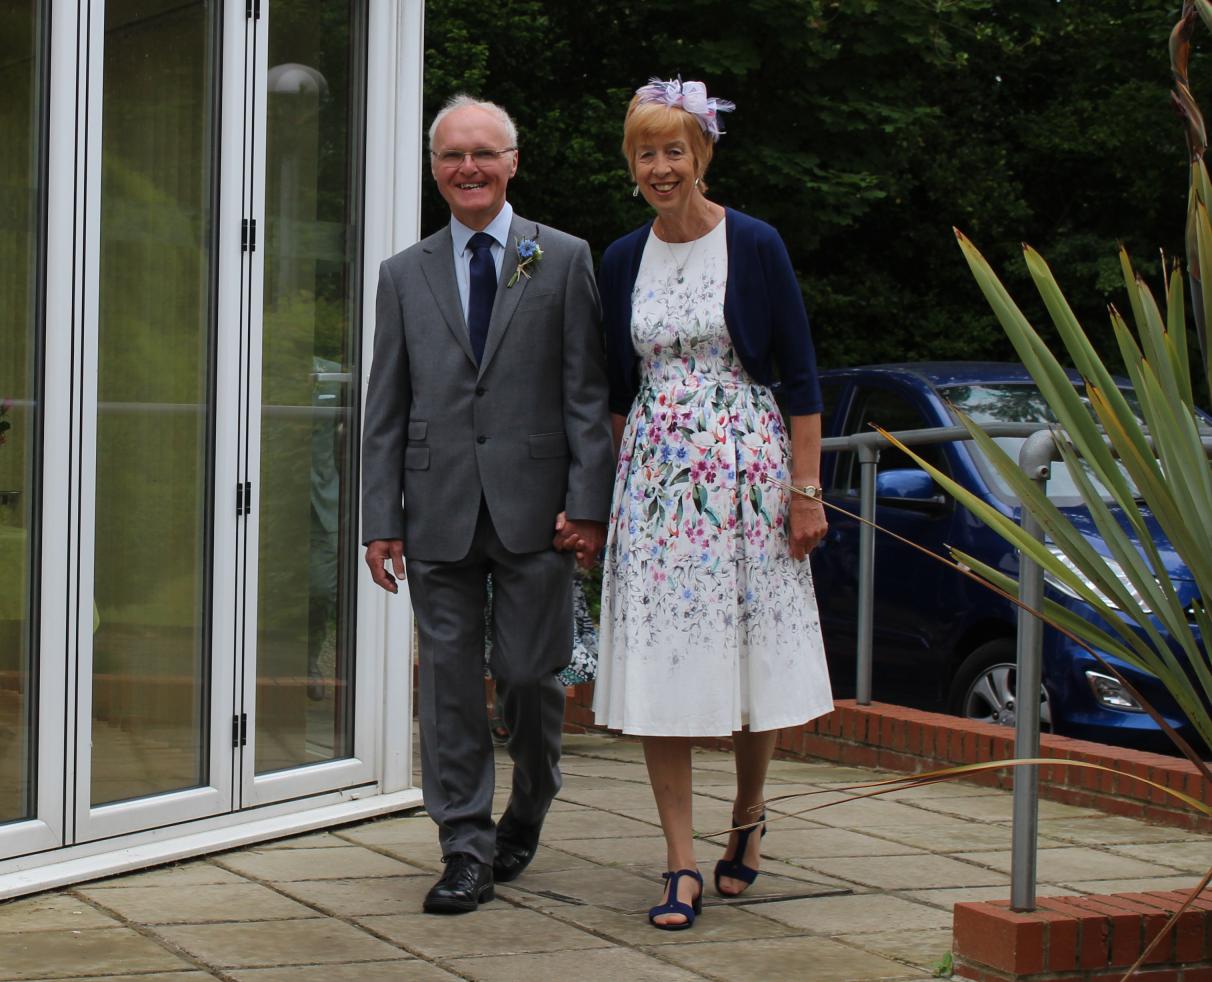 Monday 5th June, Arrival of the Bride & Groom at the Watford Quaker Meeting House.